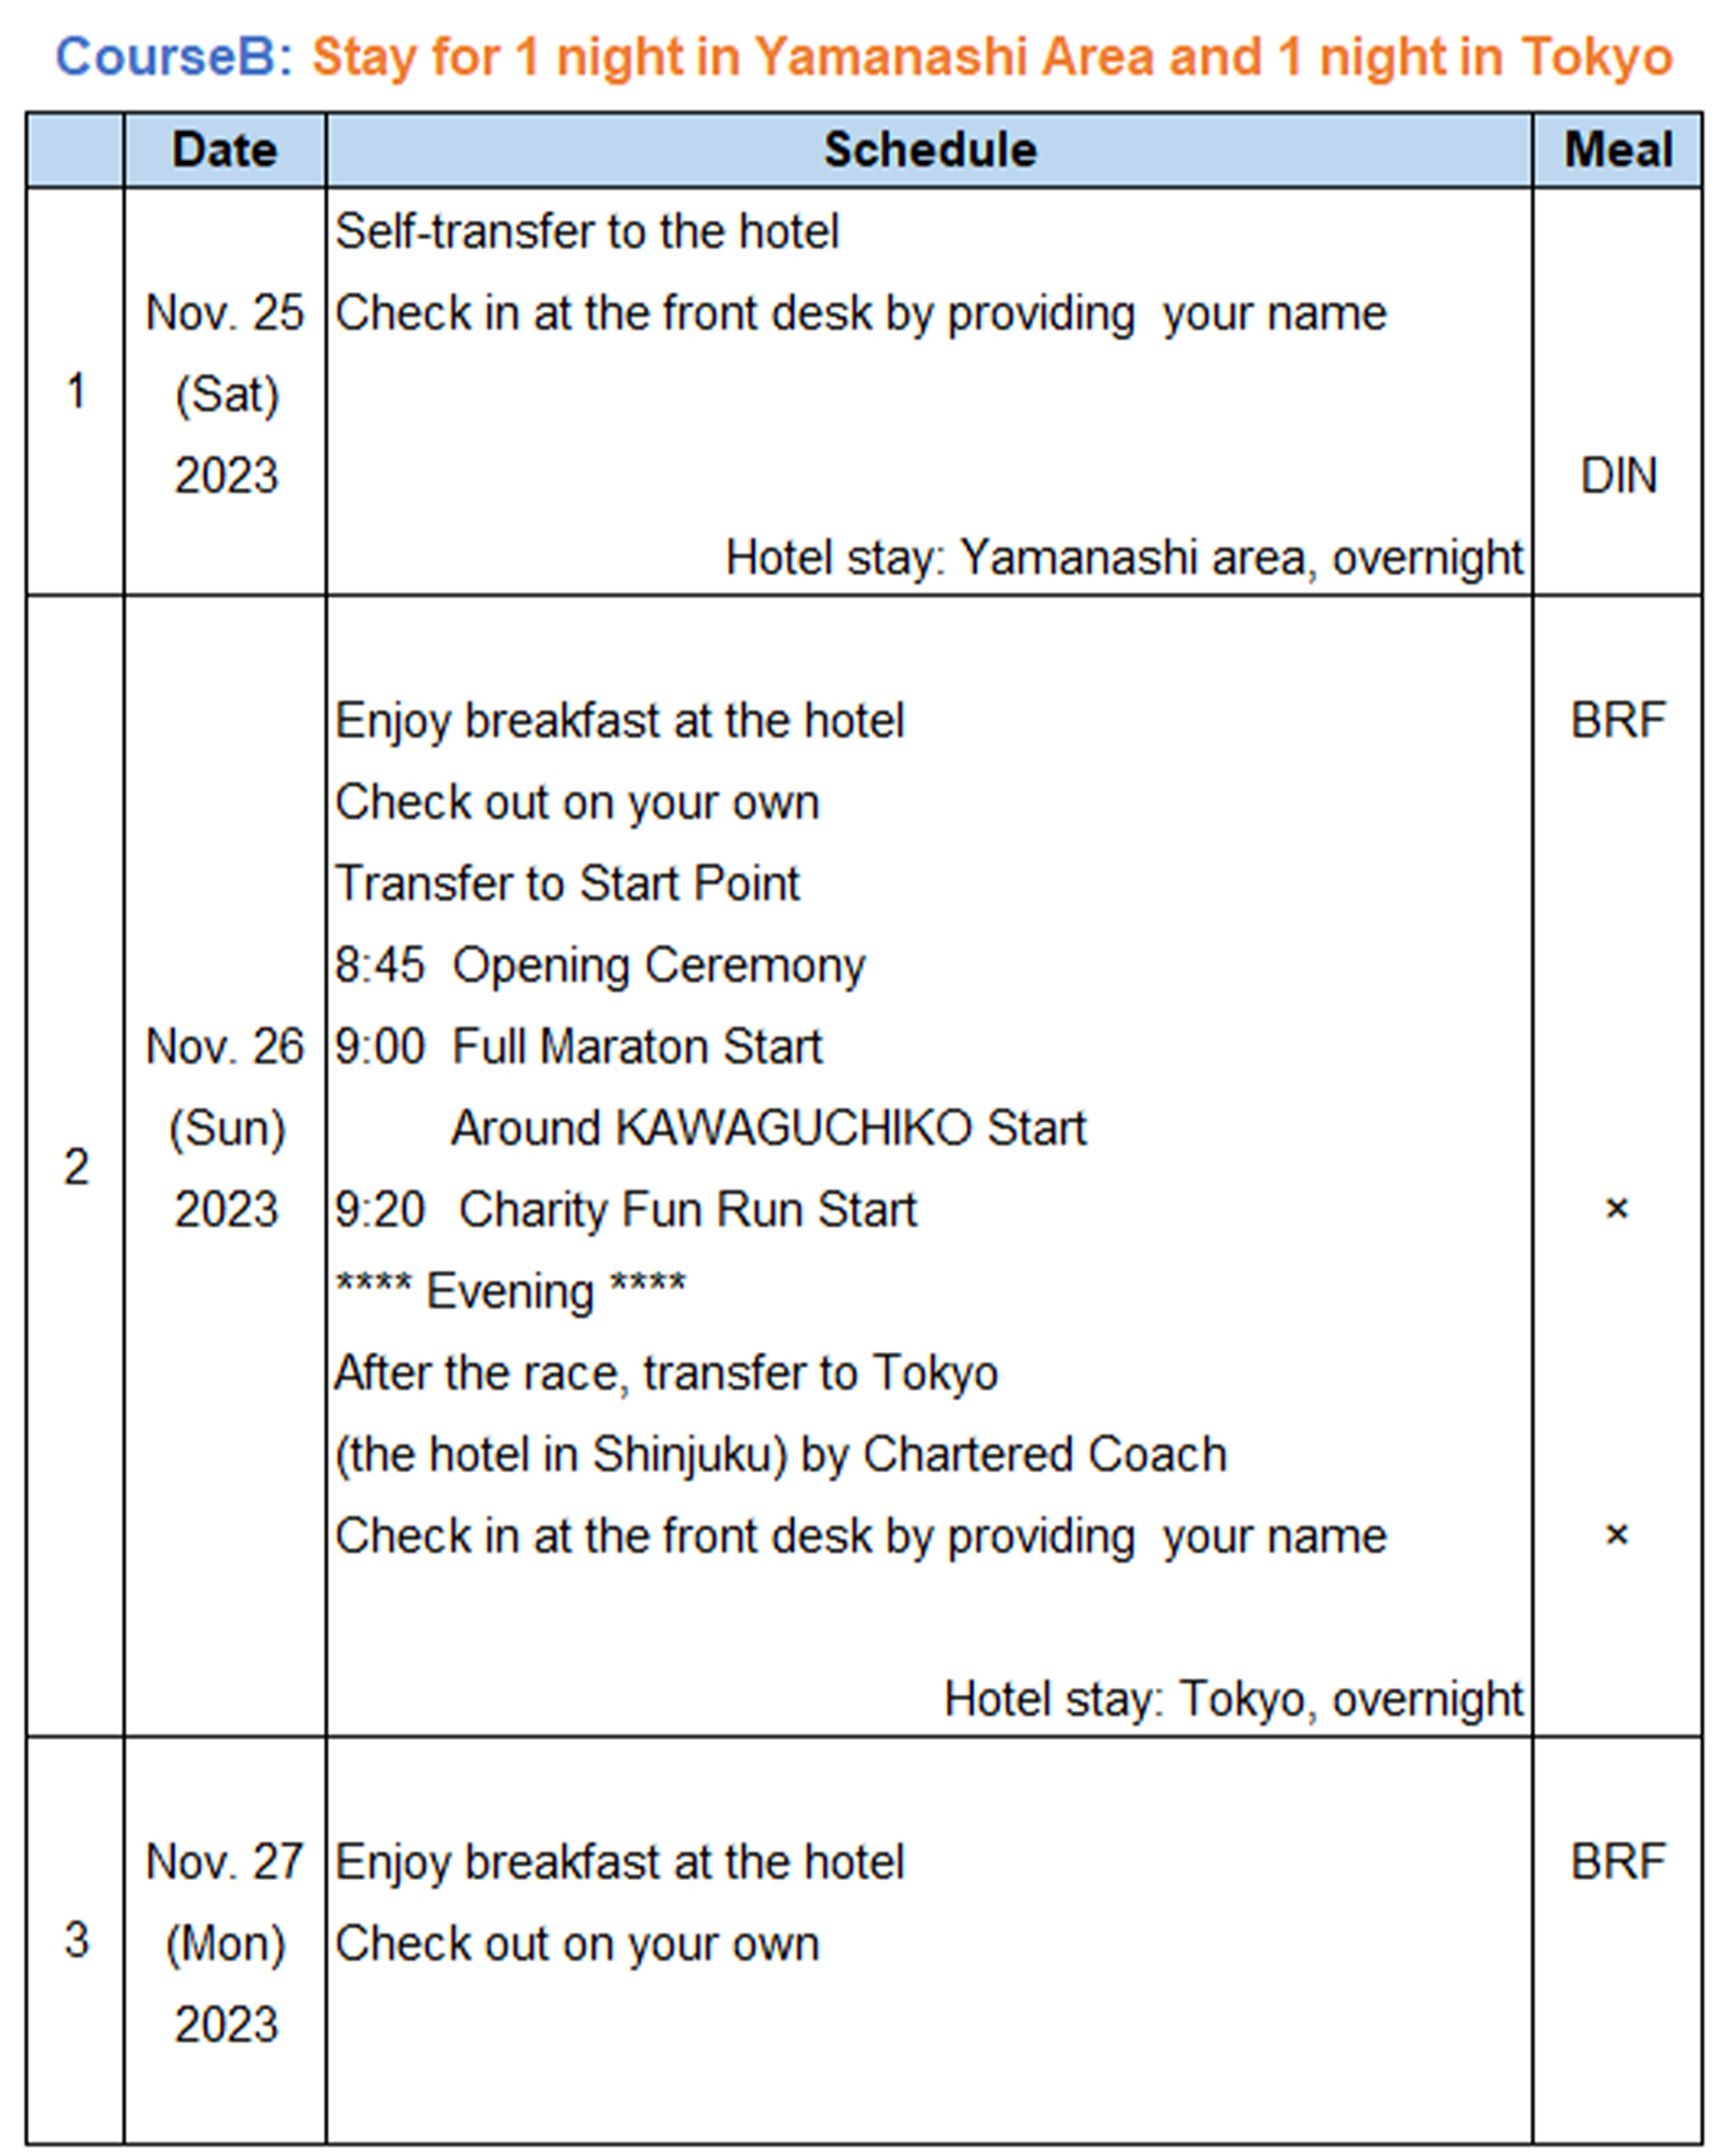 CourseB Itinerary Table